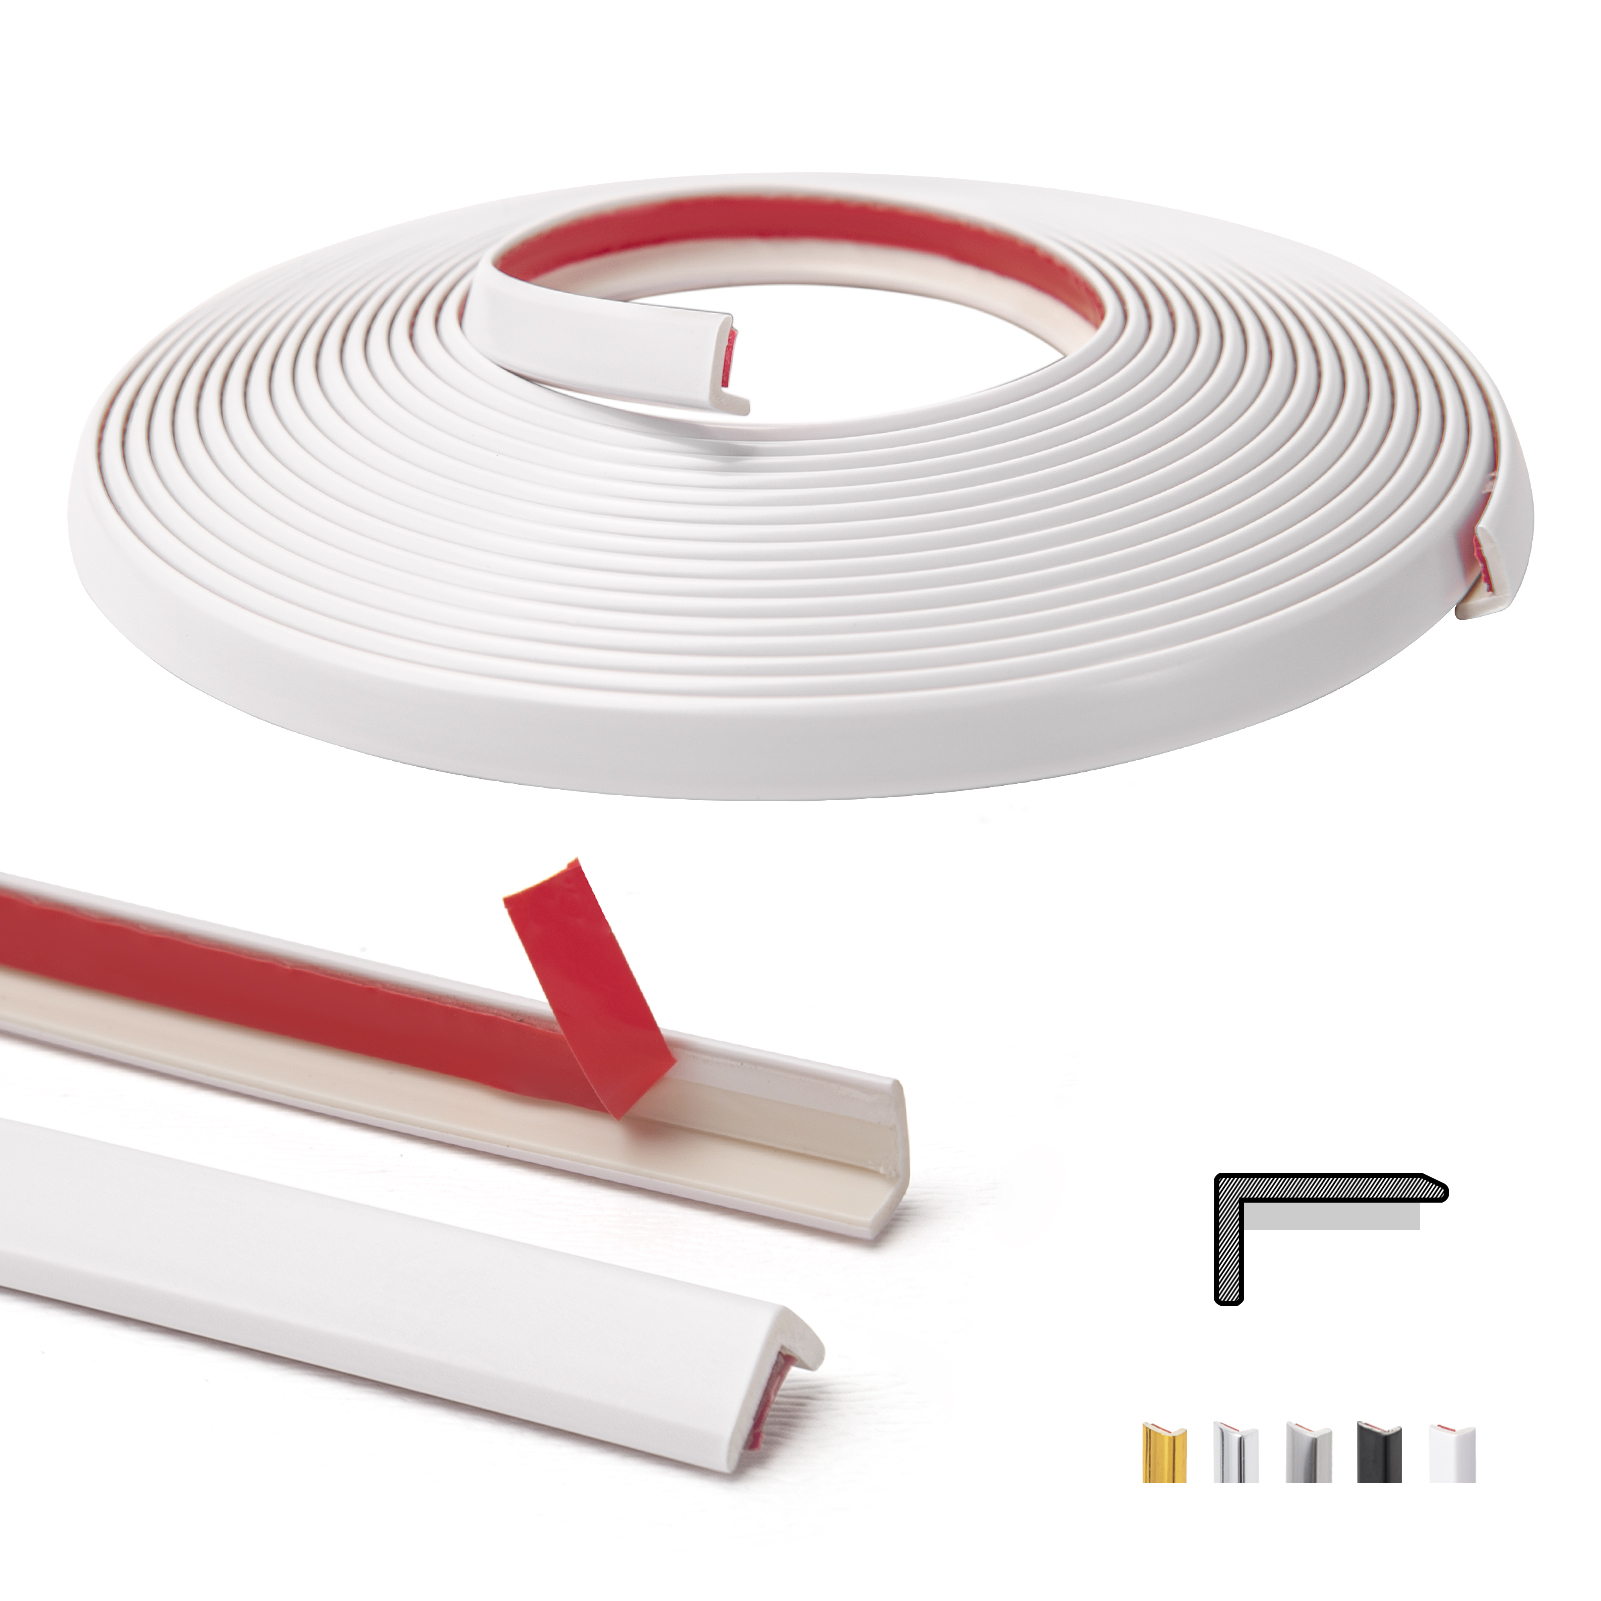 A17981 - 10 Ft Peel and Stick Trim for Backsplash Tile Edge, Self-Adhesive  Liner for Corner Decor in Stainless Steel